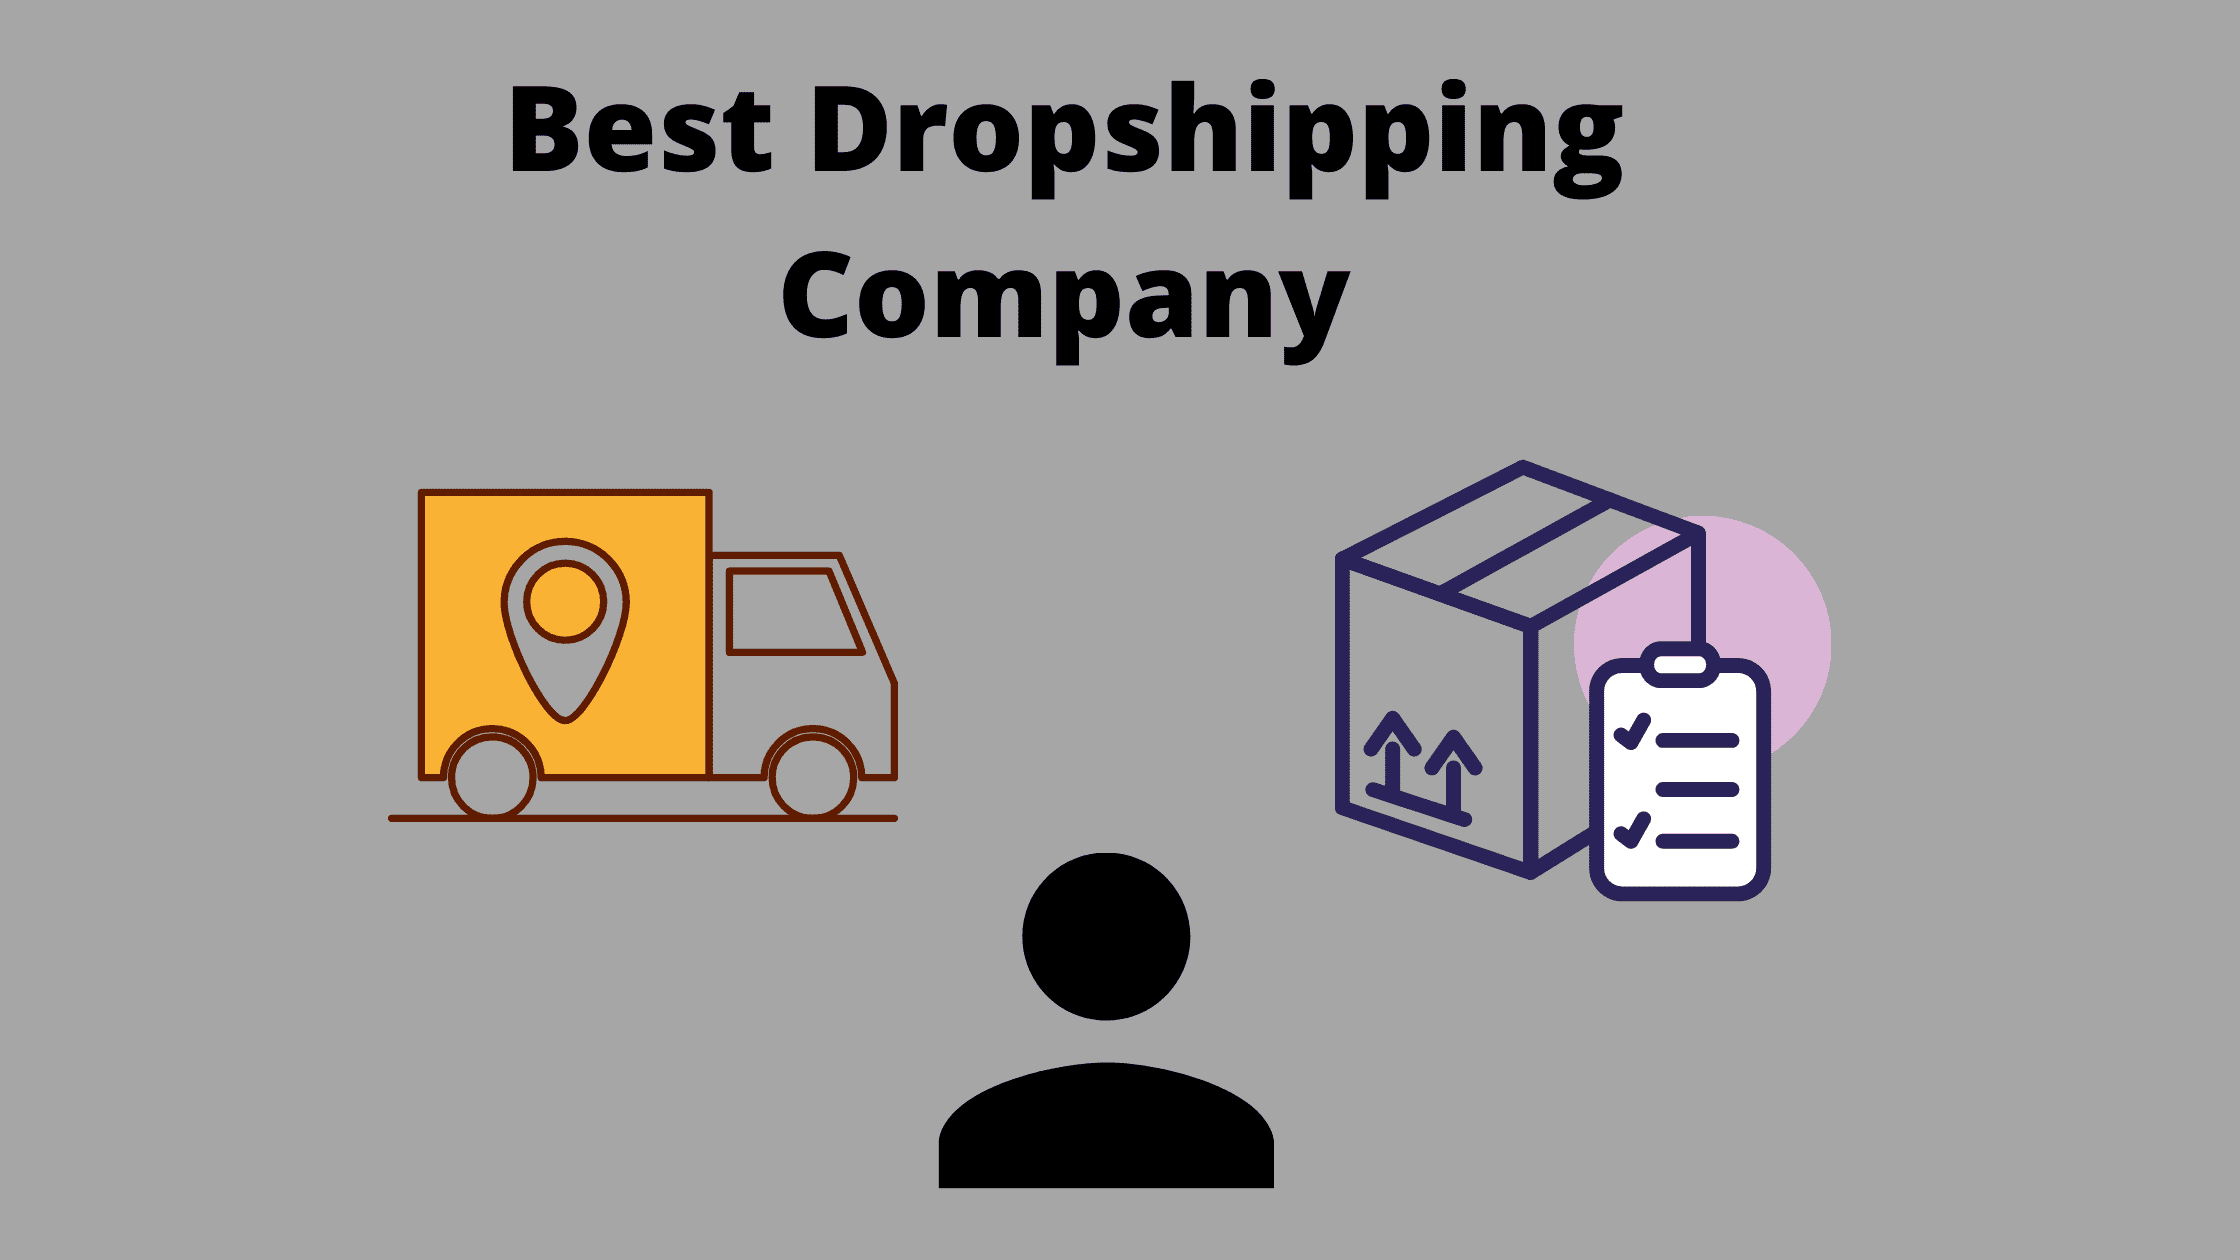 Best Dropshipping Company